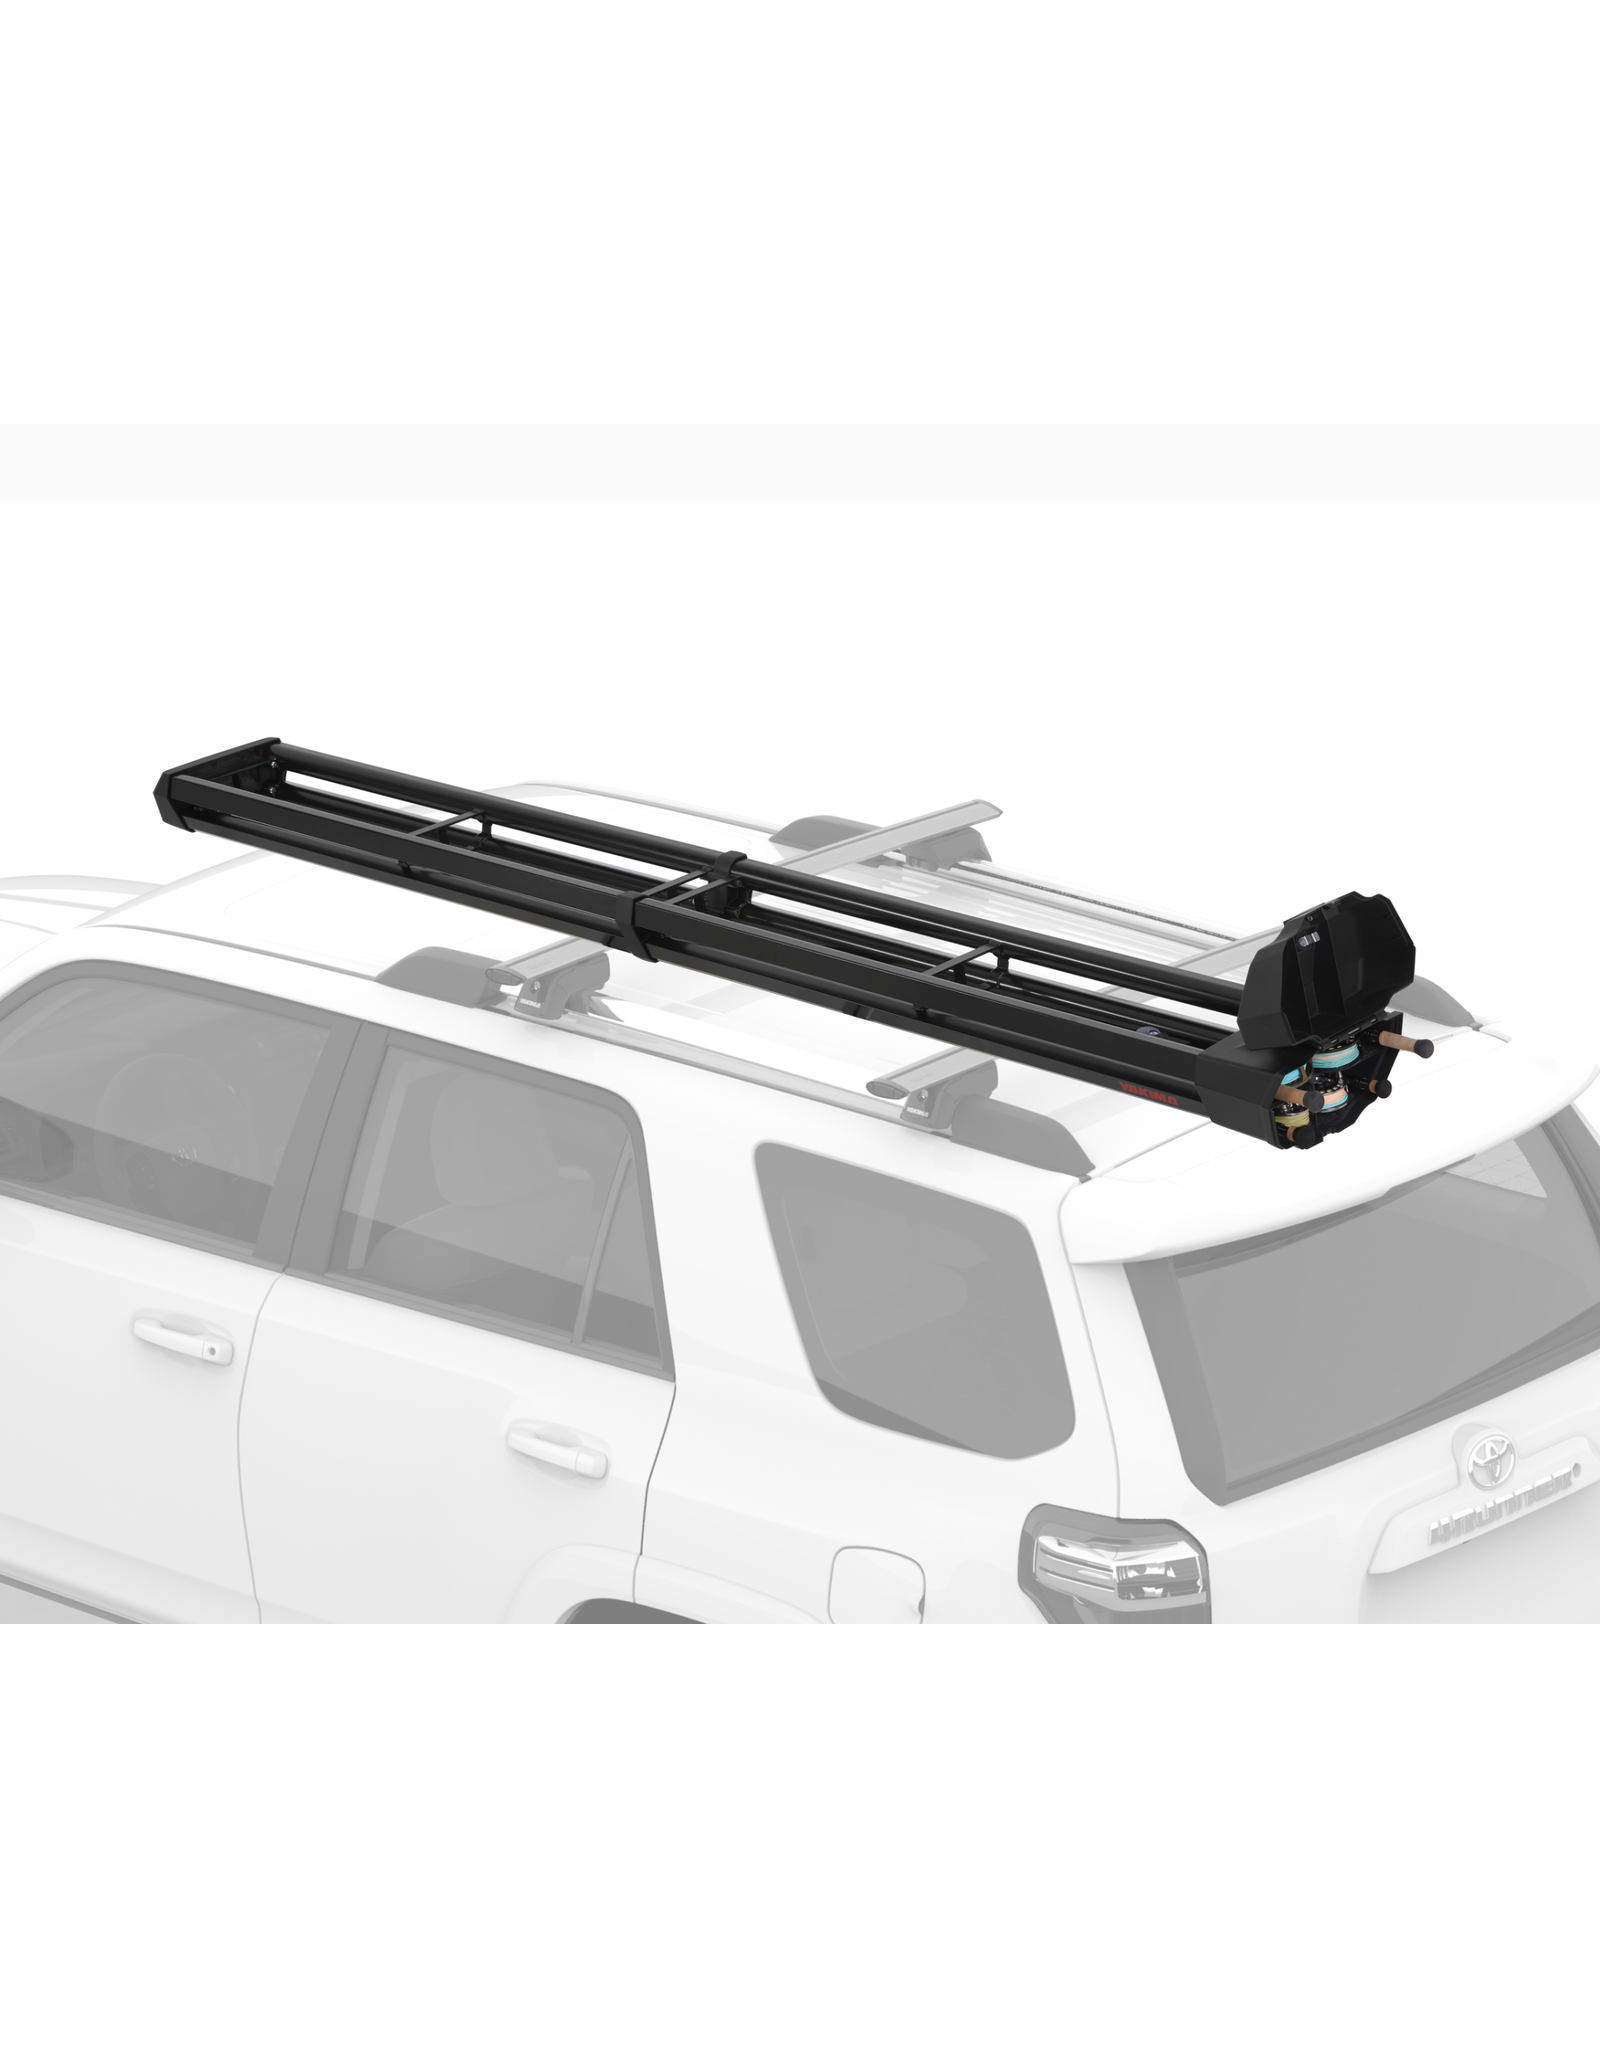 Doublehaul Fly Rod Carrier Racks For The Road